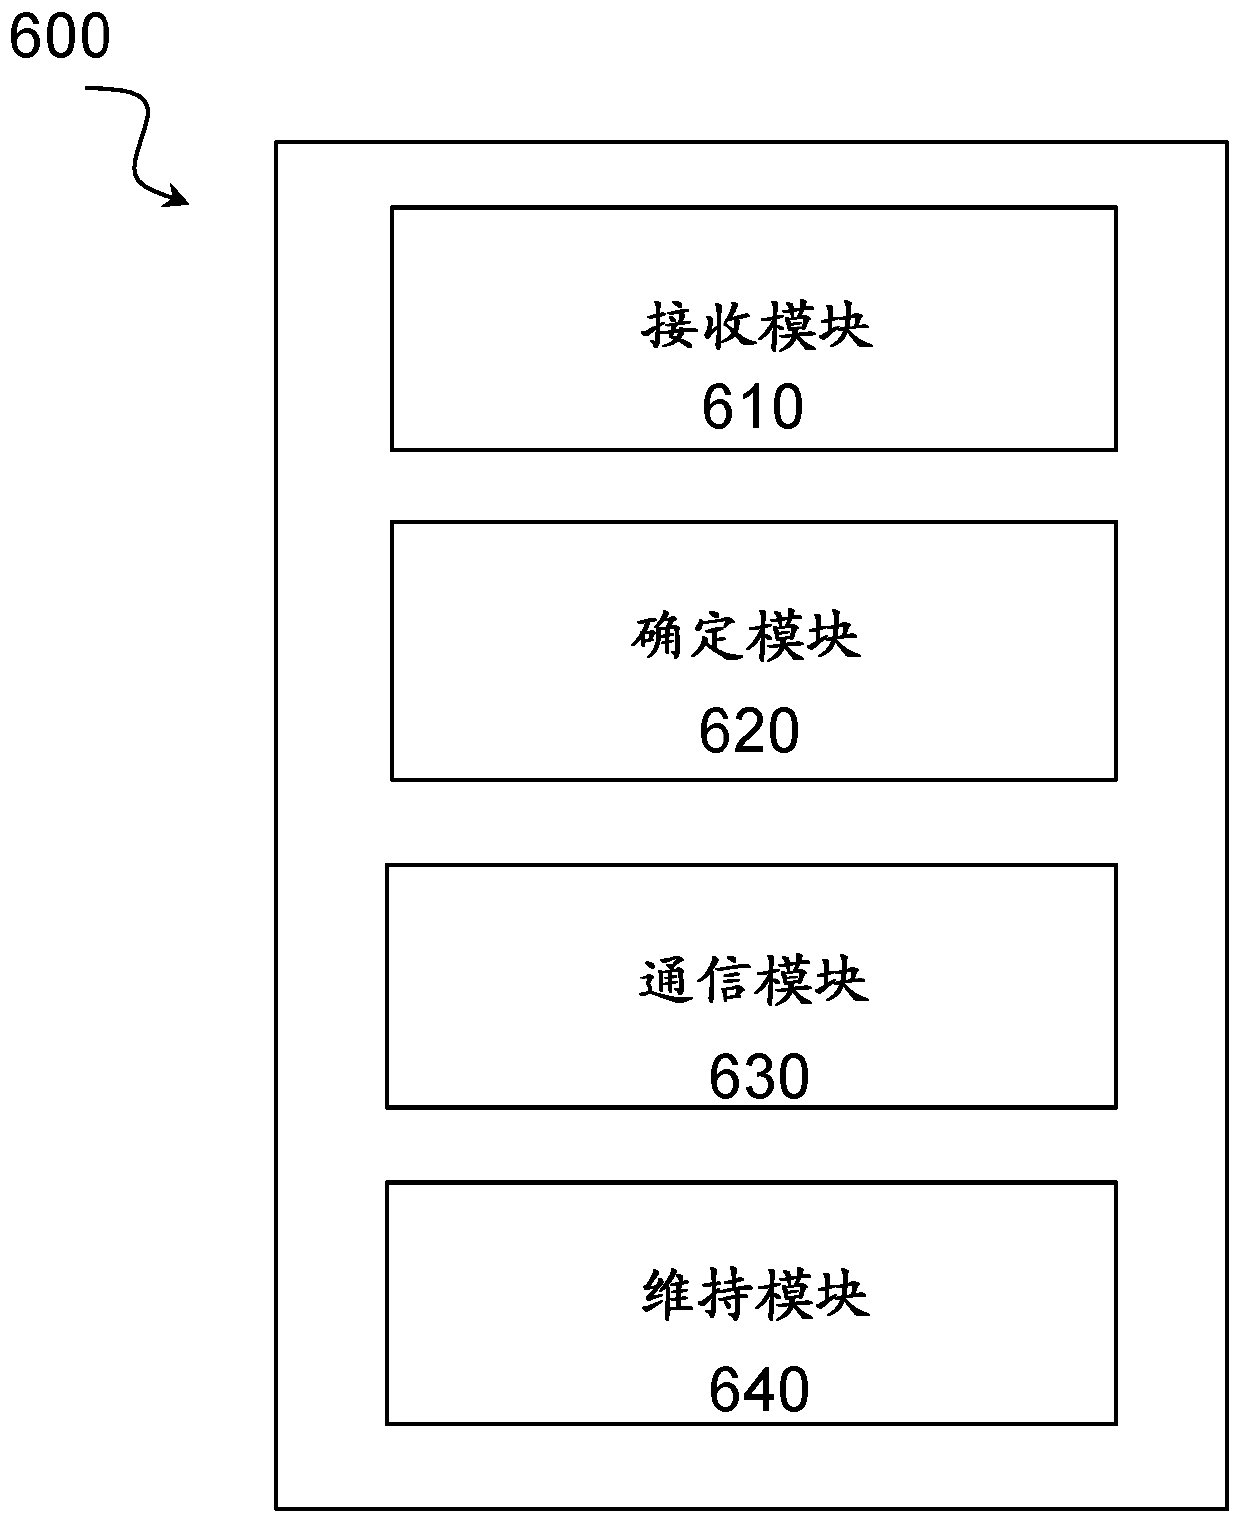 Terminal-specific cluster of access nodes for high frequency wireless access